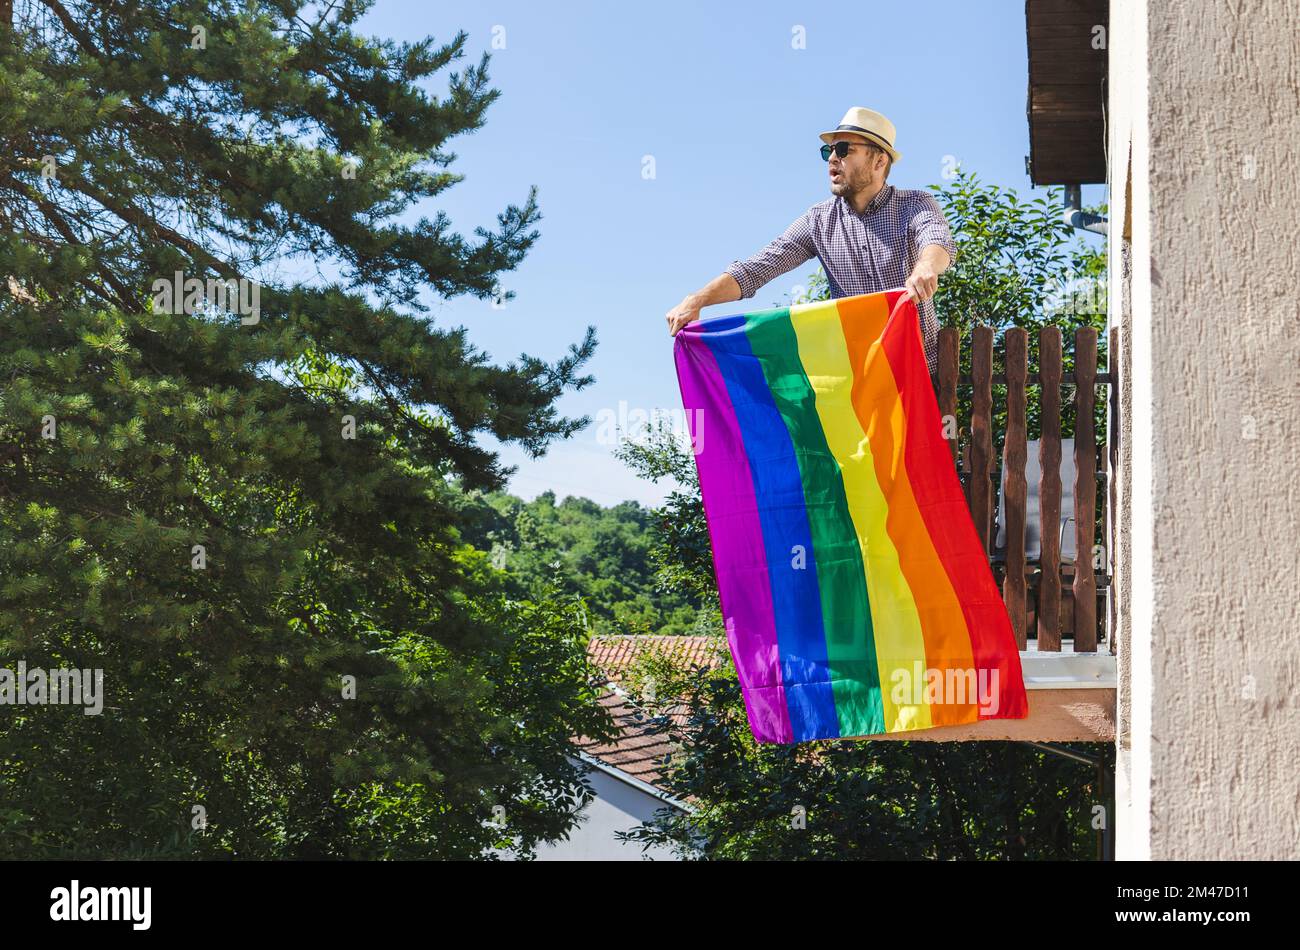 Heterosexual man in a hat standing on the balcony and holding a rainbow flag, supporting LGBT community, human rights, equality, and diversity during Stock Photo